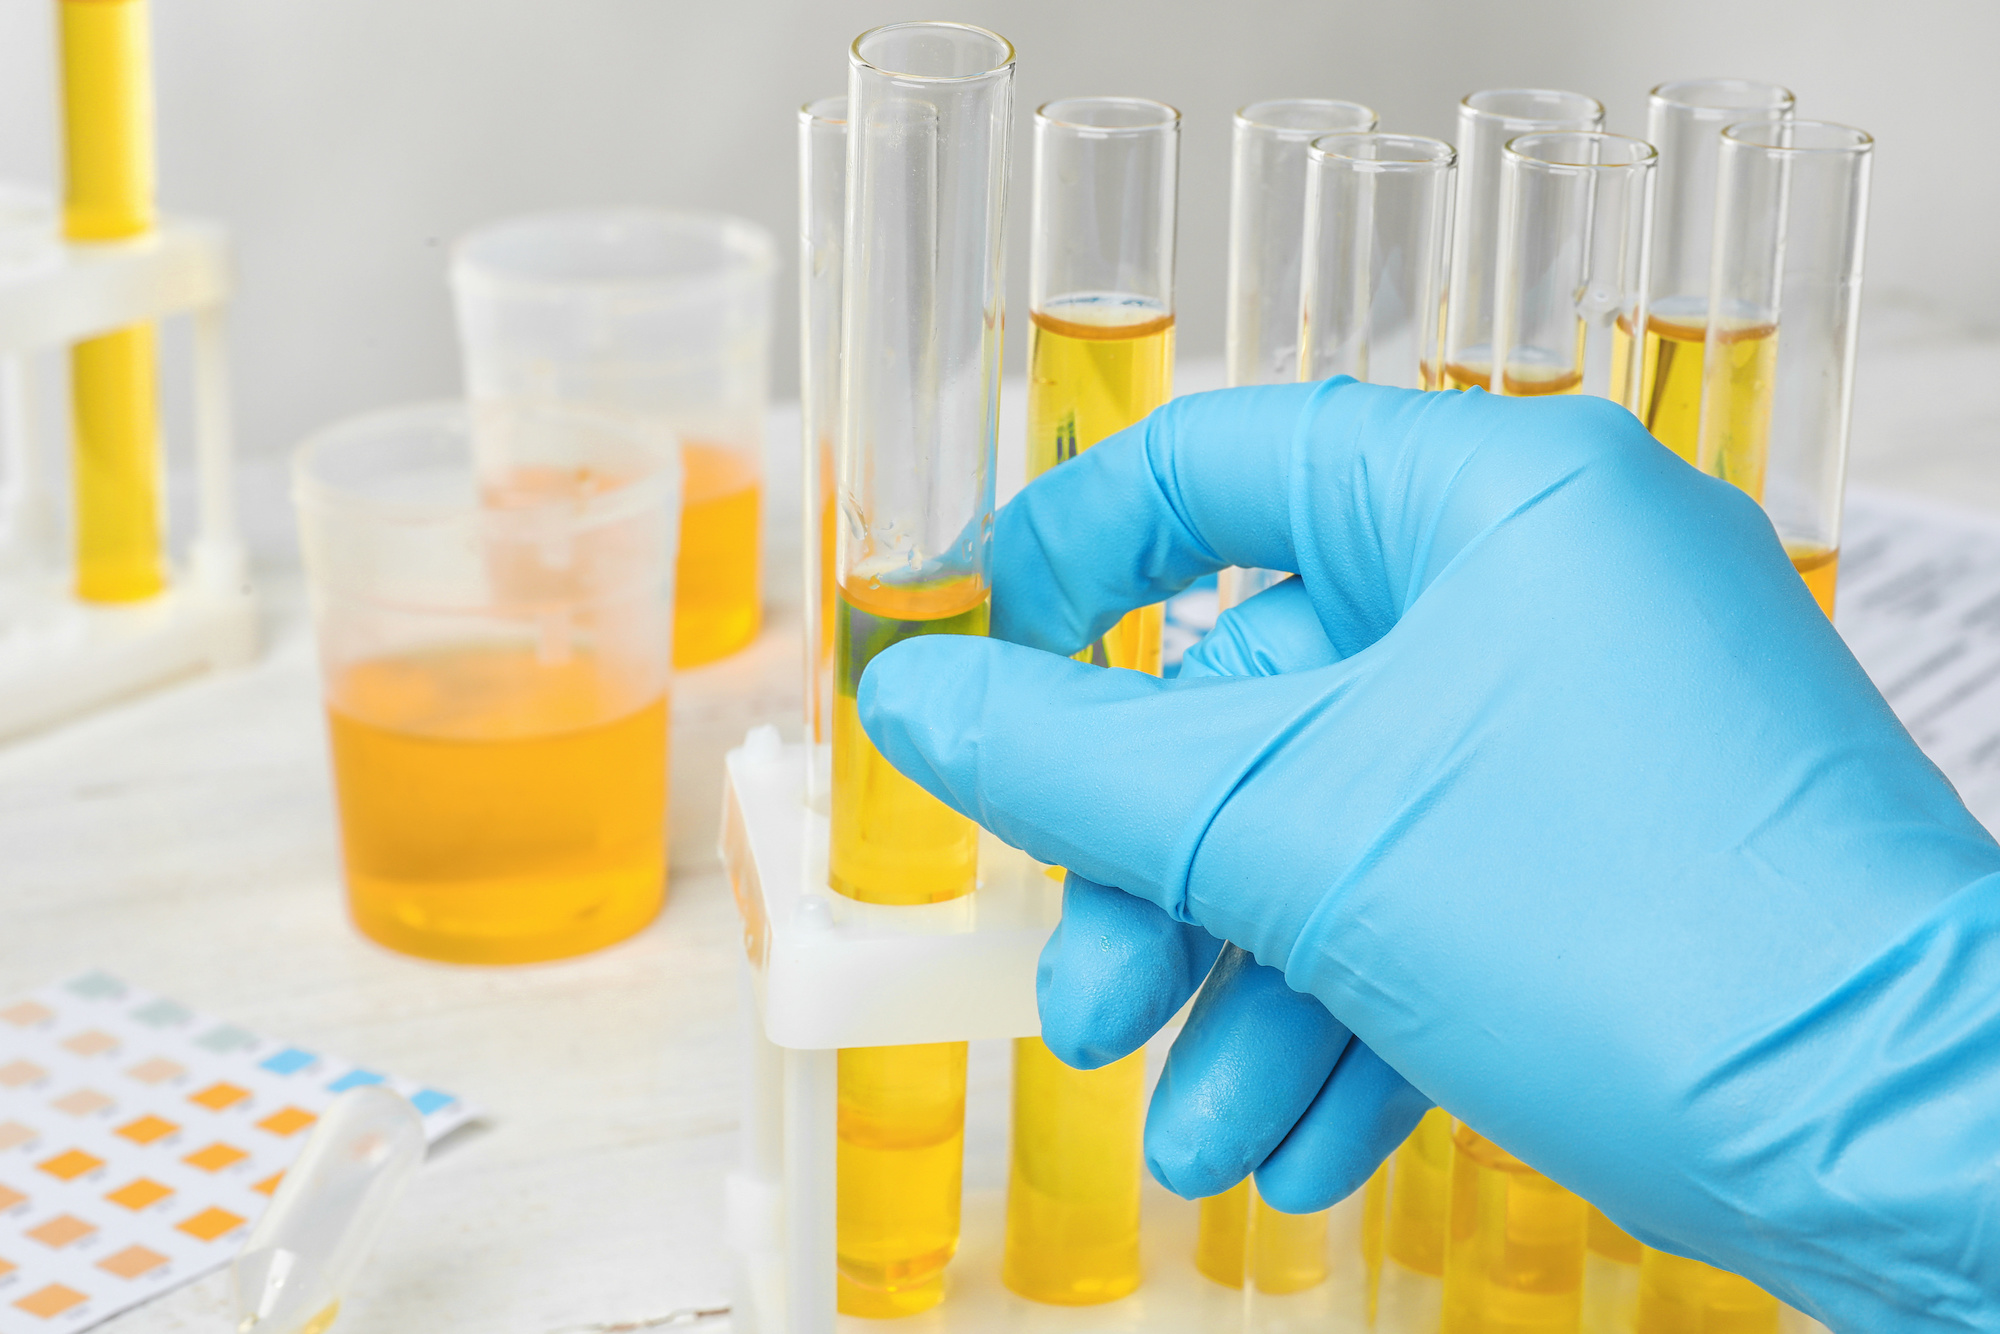 A lab tech analyzing urine color in test tubes 